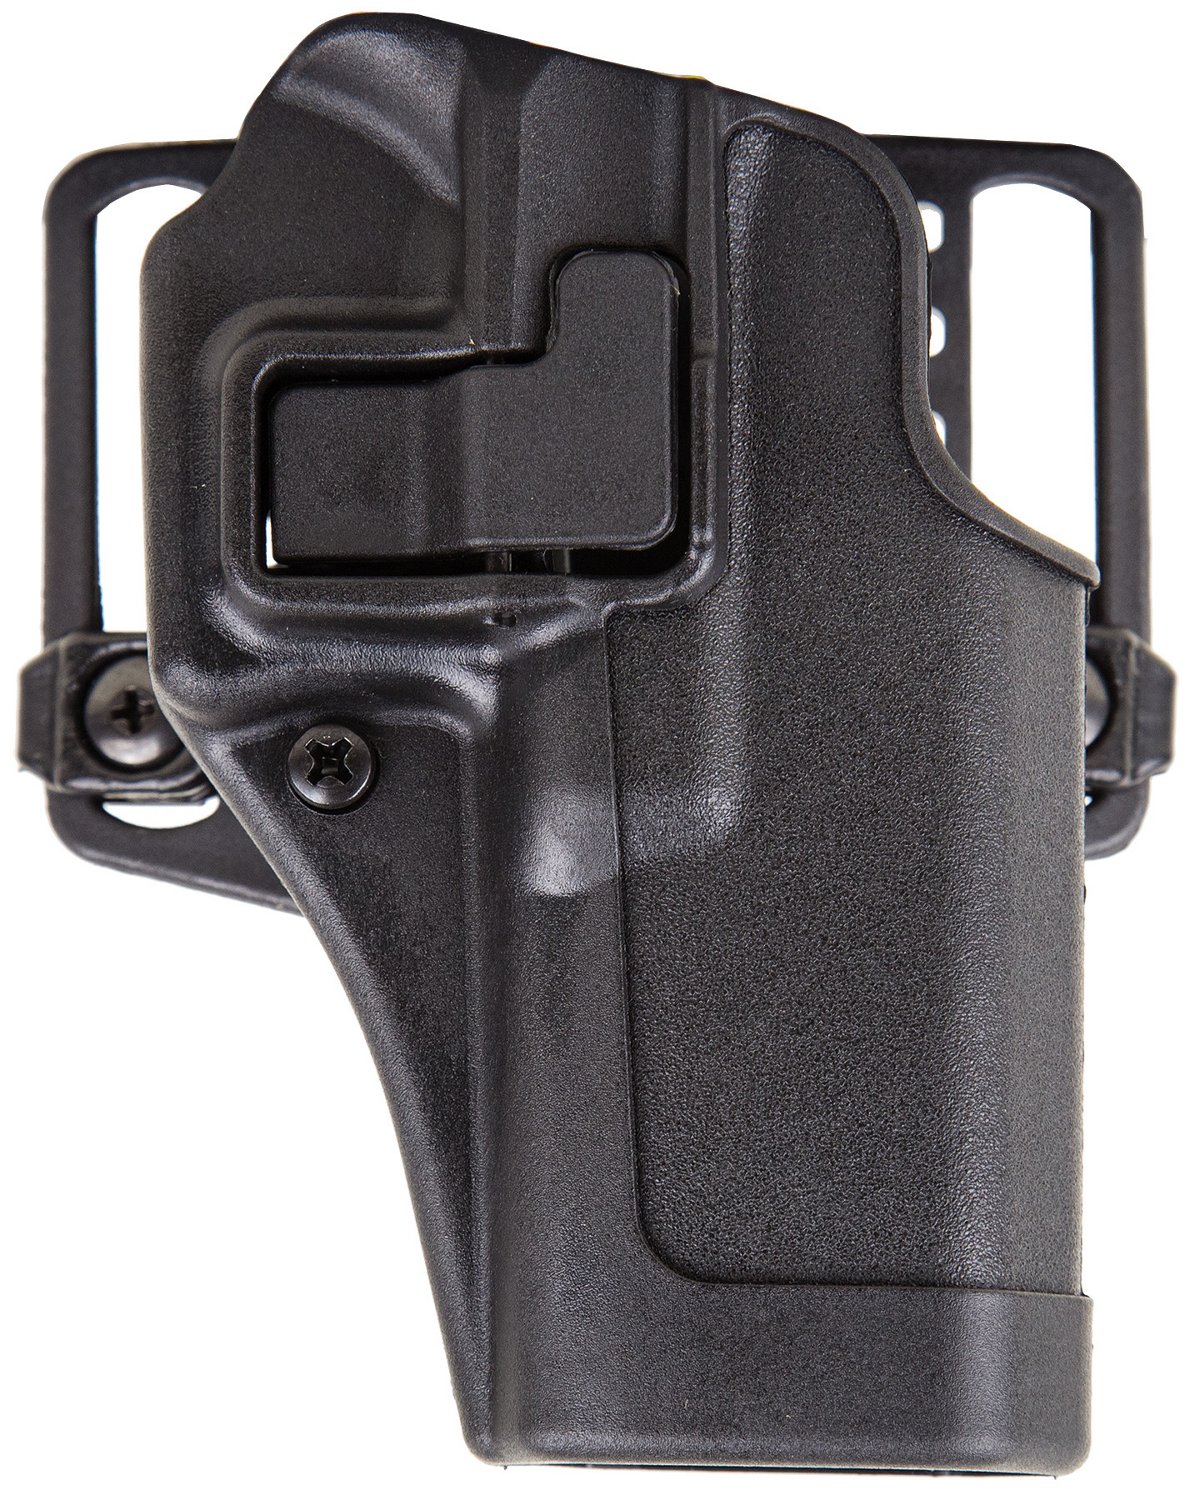 Blackhawk SERPA CQC Paddle Holster Left-handed                                                                                   - view number 1 selected